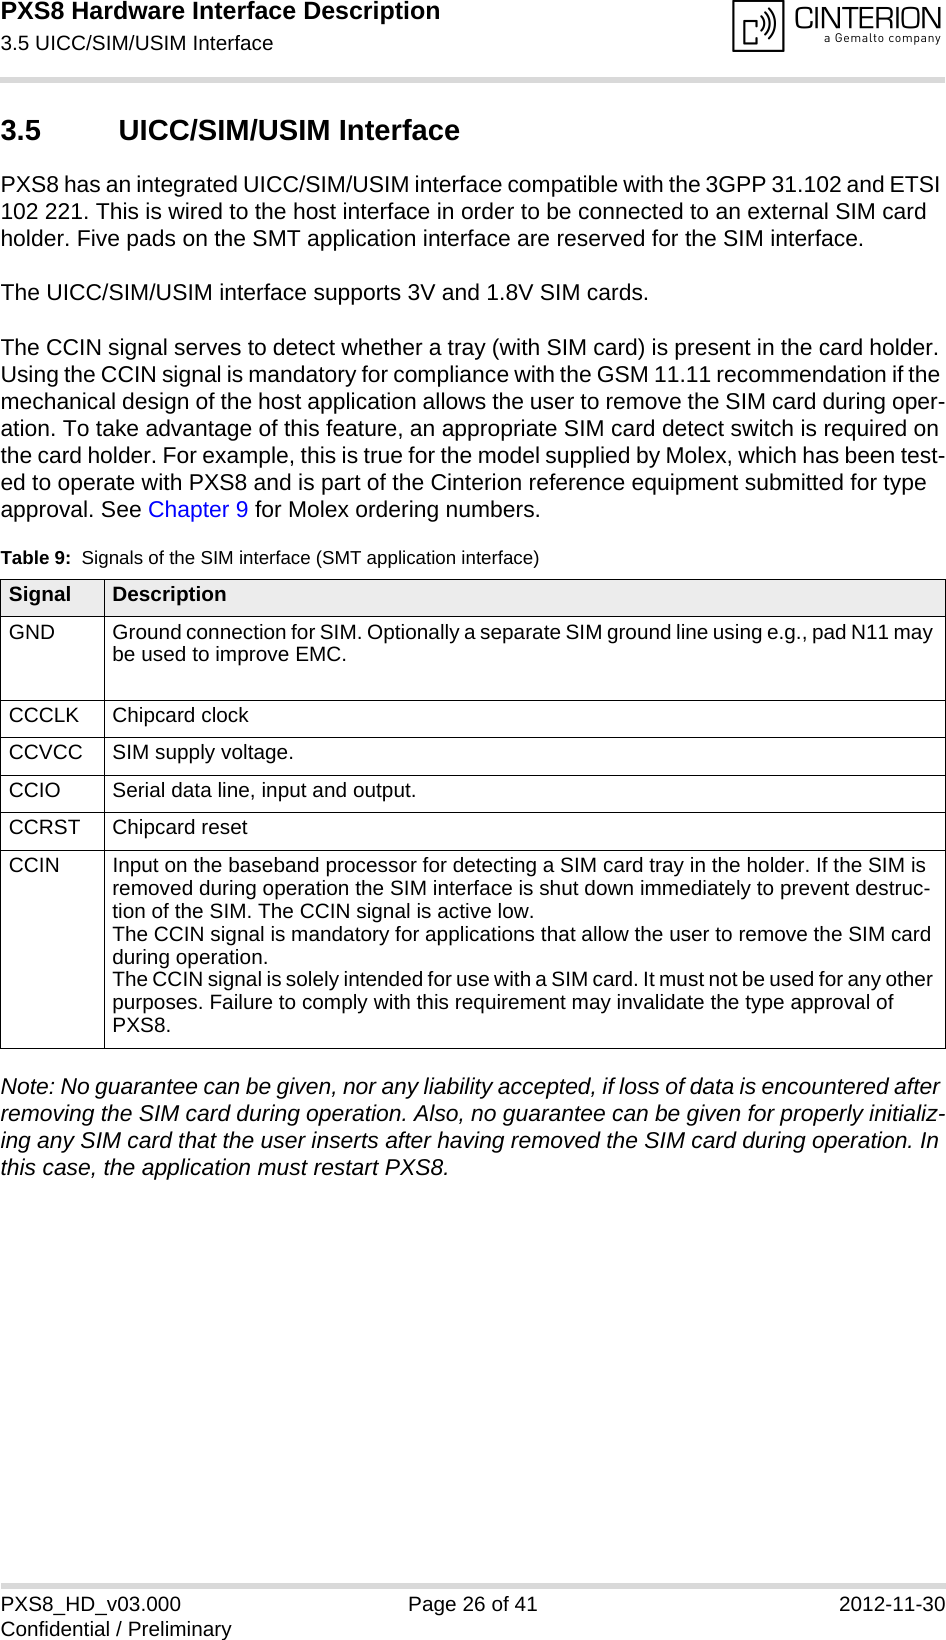 PXS8 Hardware Interface Description3.5 UICC/SIM/USIM Interface29PXS8_HD_v03.000 Page 26 of 41 2012-11-30Confidential / Preliminary3.5 UICC/SIM/USIM InterfacePXS8 has an integrated UICC/SIM/USIM interface compatible with the 3GPP 31.102 and ETSI 102 221. This is wired to the host interface in order to be connected to an external SIM card holder. Five pads on the SMT application interface are reserved for the SIM interface. The UICC/SIM/USIM interface supports 3V and 1.8V SIM cards. The CCIN signal serves to detect whether a tray (with SIM card) is present in the card holder. Using the CCIN signal is mandatory for compliance with the GSM 11.11 recommendation if the mechanical design of the host application allows the user to remove the SIM card during oper-ation. To take advantage of this feature, an appropriate SIM card detect switch is required on the card holder. For example, this is true for the model supplied by Molex, which has been test-ed to operate with PXS8 and is part of the Cinterion reference equipment submitted for type approval. See Chapter 9 for Molex ordering numbers.Note: No guarantee can be given, nor any liability accepted, if loss of data is encountered after removing the SIM card during operation. Also, no guarantee can be given for properly initializ-ing any SIM card that the user inserts after having removed the SIM card during operation. In this case, the application must restart PXS8.Table 9:  Signals of the SIM interface (SMT application interface)Signal DescriptionGND Ground connection for SIM. Optionally a separate SIM ground line using e.g., pad N11 may be used to improve EMC.CCCLK Chipcard clockCCVCC SIM supply voltage.CCIO Serial data line, input and output.CCRST Chipcard resetCCIN Input on the baseband processor for detecting a SIM card tray in the holder. If the SIM is removed during operation the SIM interface is shut down immediately to prevent destruc-tion of the SIM. The CCIN signal is active low.The CCIN signal is mandatory for applications that allow the user to remove the SIM card during operation. The CCIN signal is solely intended for use with a SIM card. It must not be used for any other purposes. Failure to comply with this requirement may invalidate the type approval of PXS8.